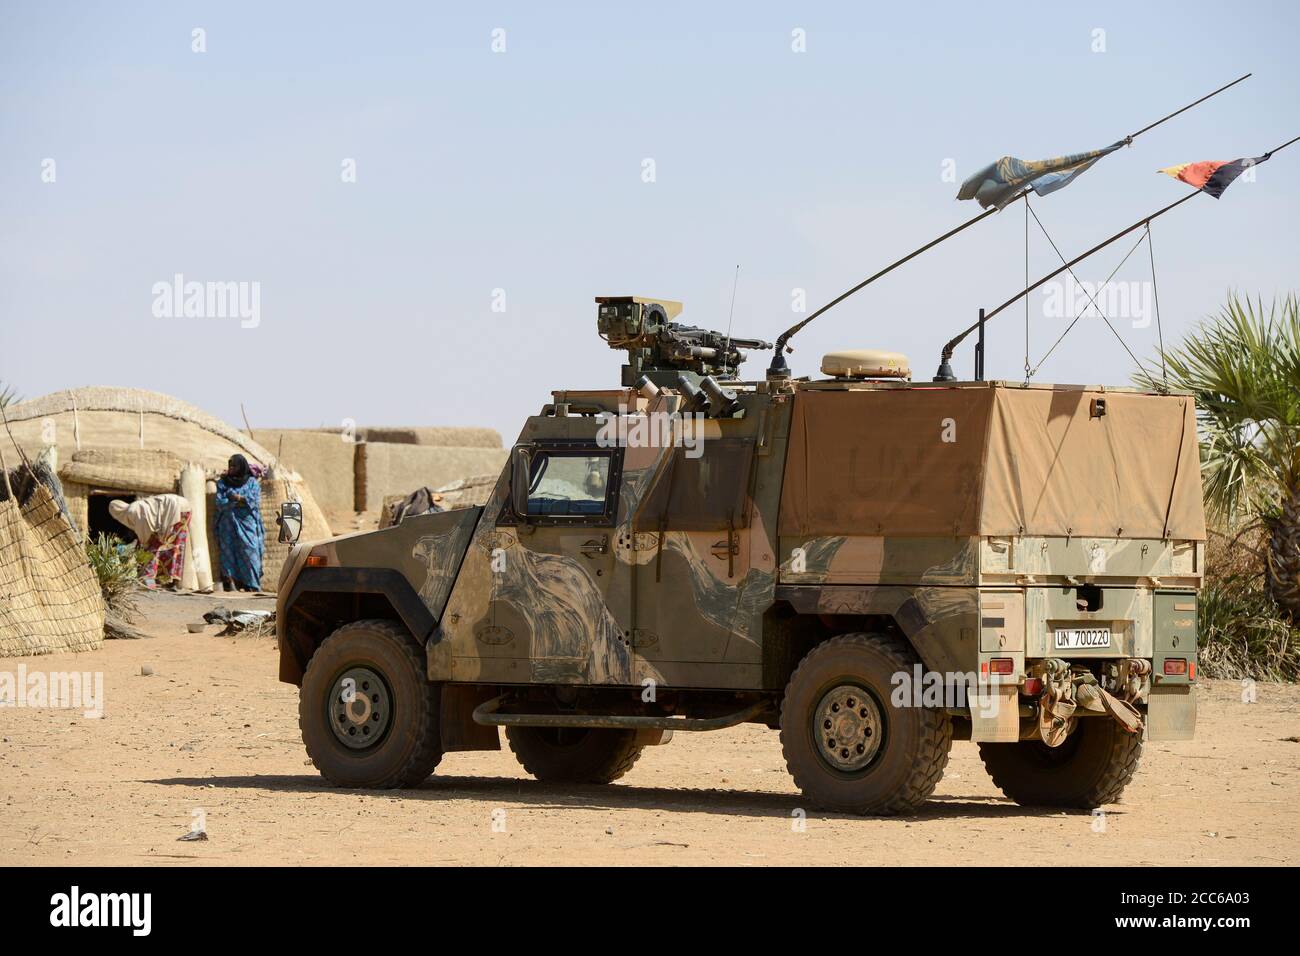 MALI, Gao, Minusma UN peace keeping mission, Camp Castor, german army Bundeswehr, patrol with Eagle Mowag armored vehicle in village BAGOUNDJÉ Stock Photo